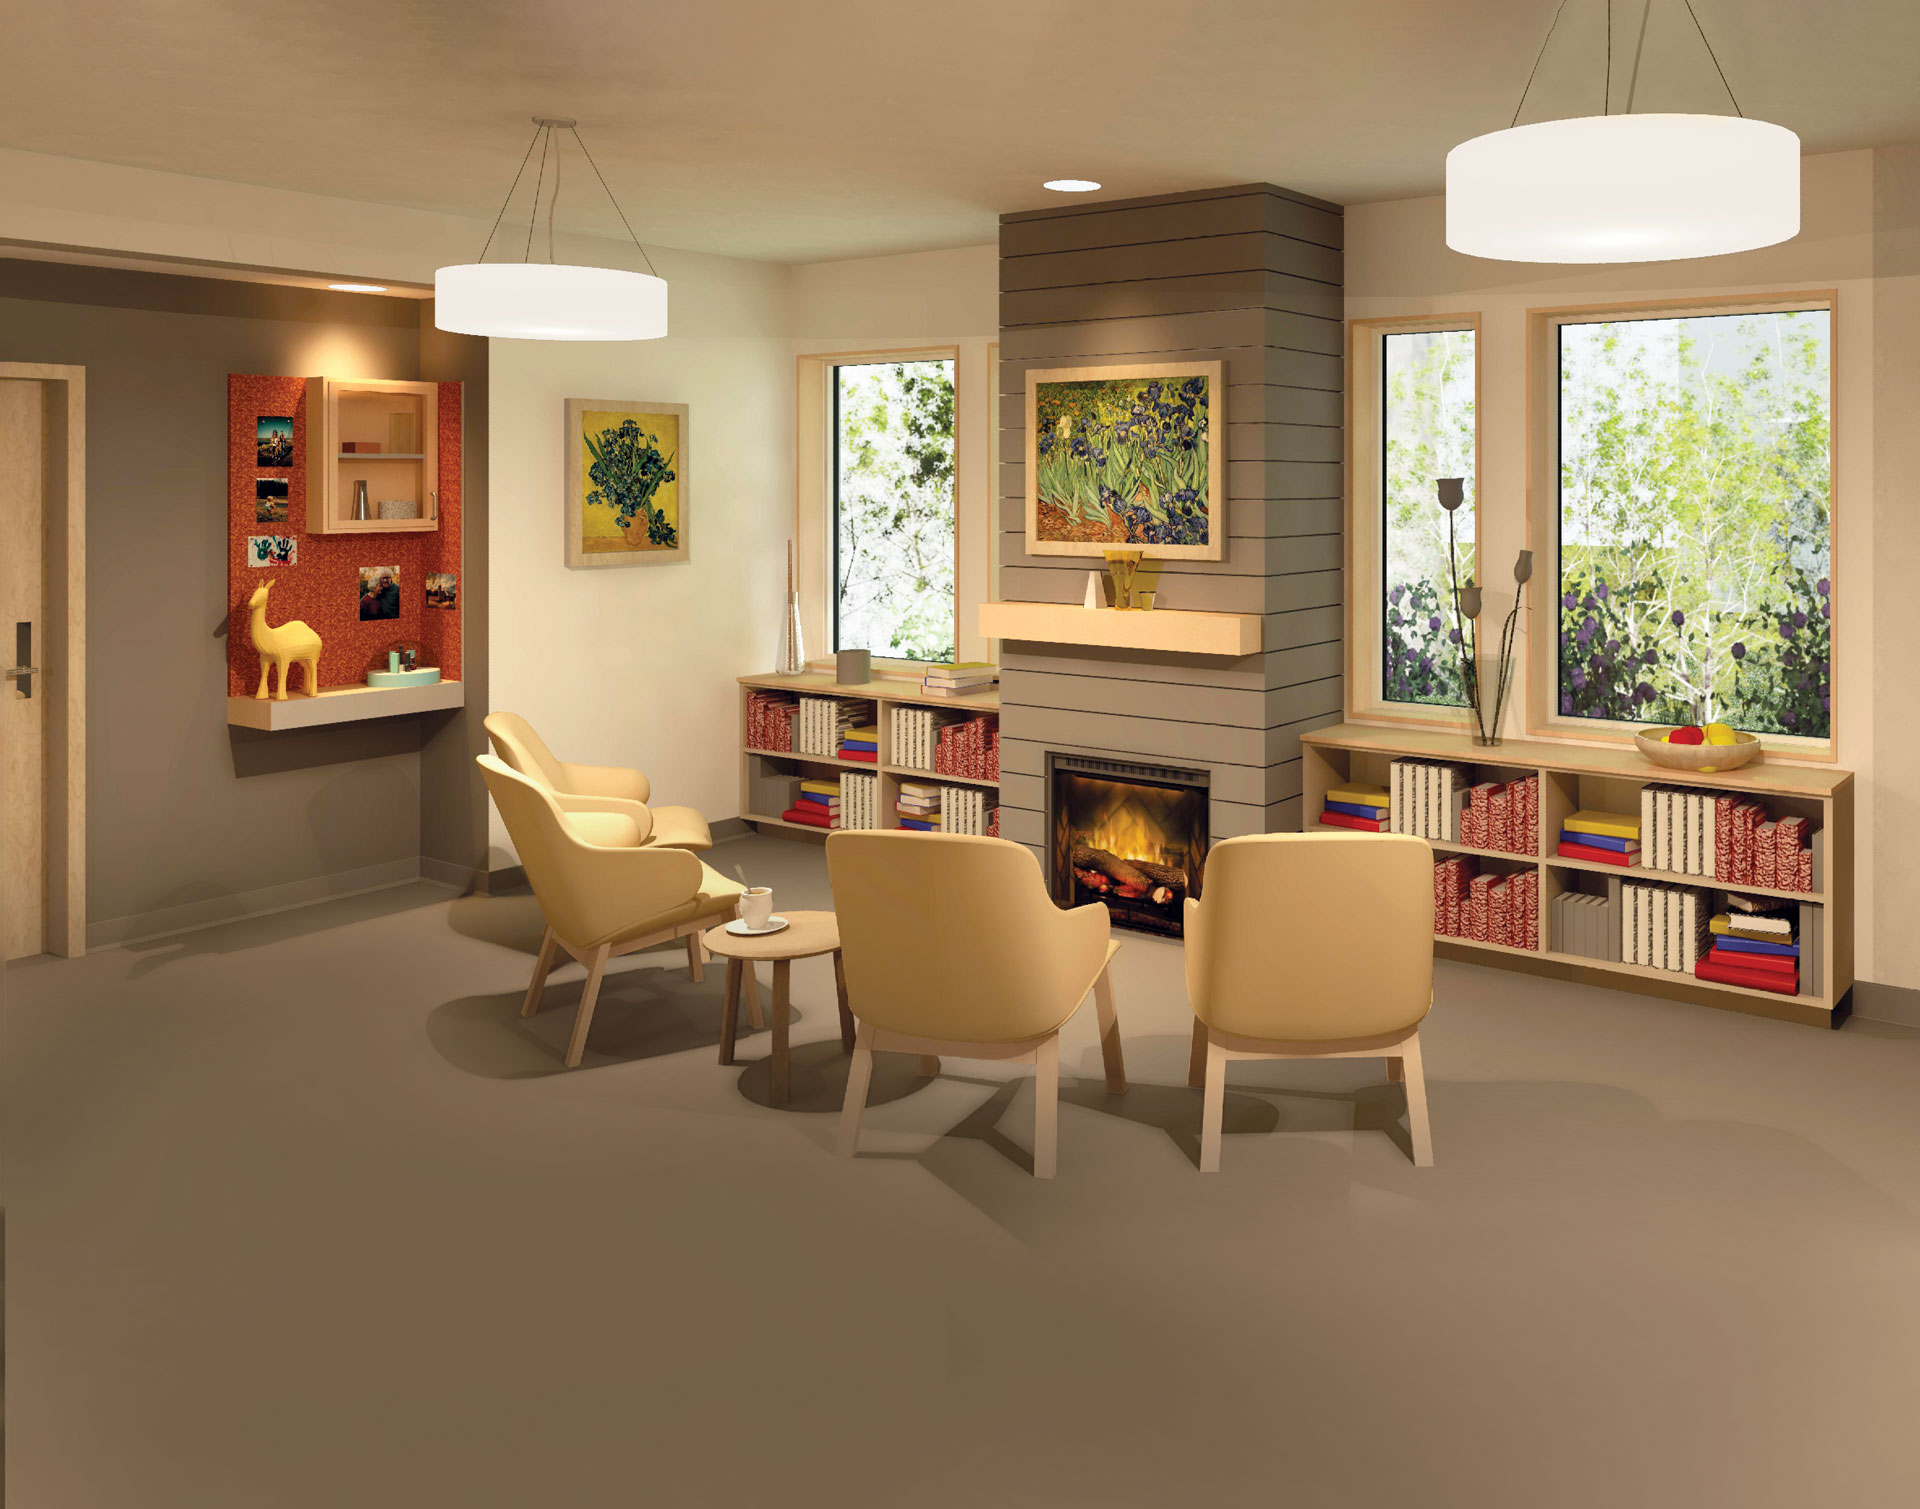 Rendering of a living room at a memory care facility